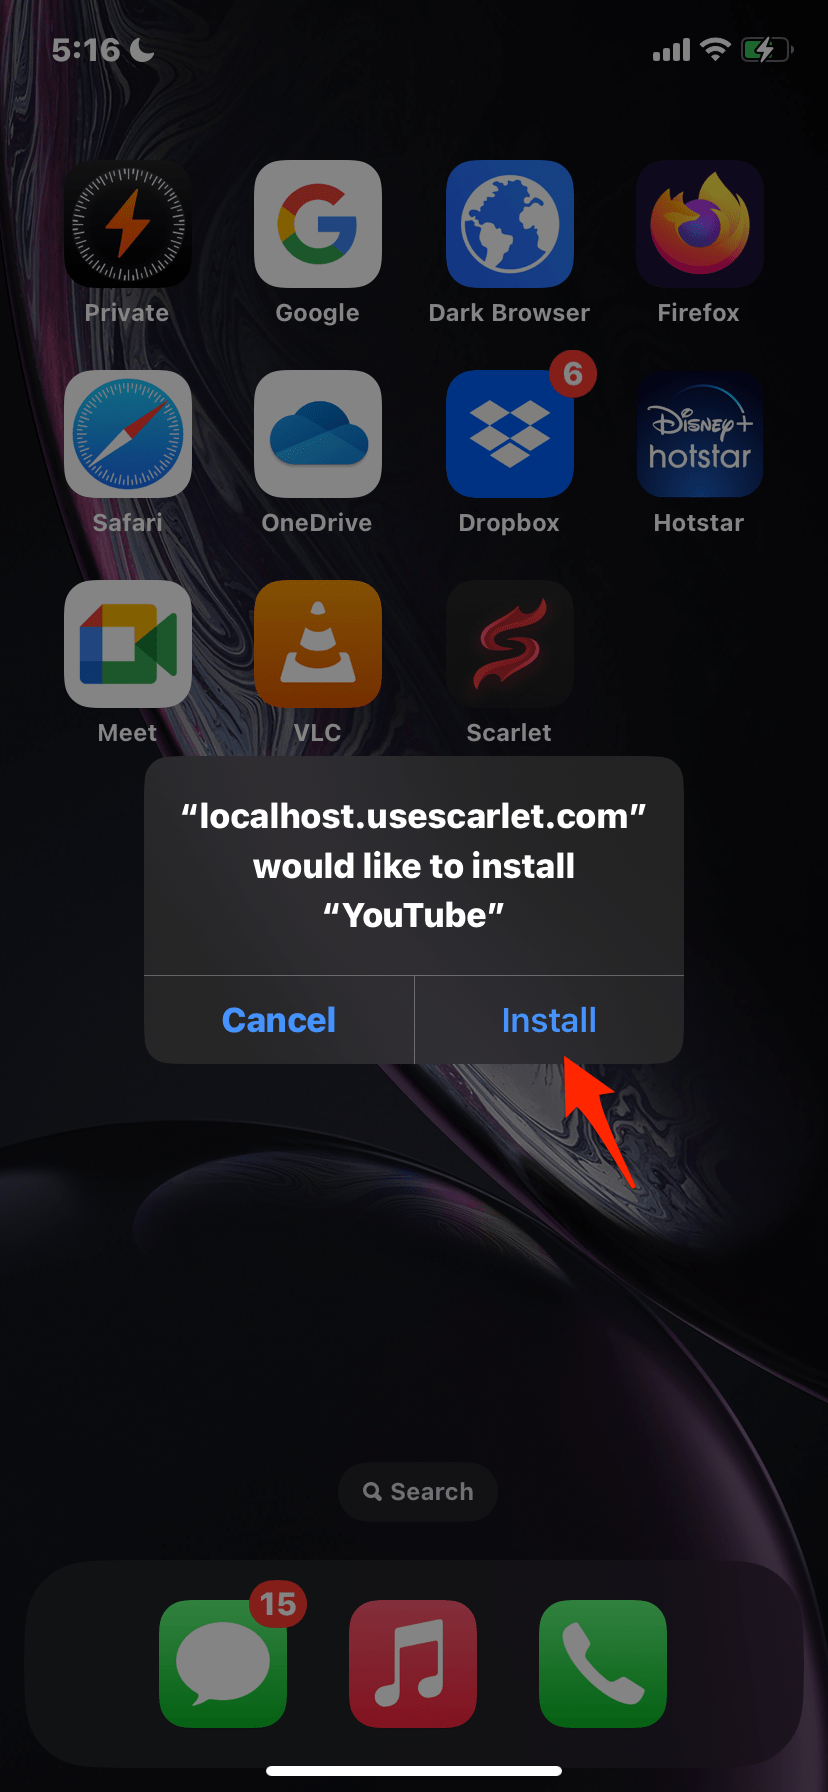 CLick_Install_to_Confirm